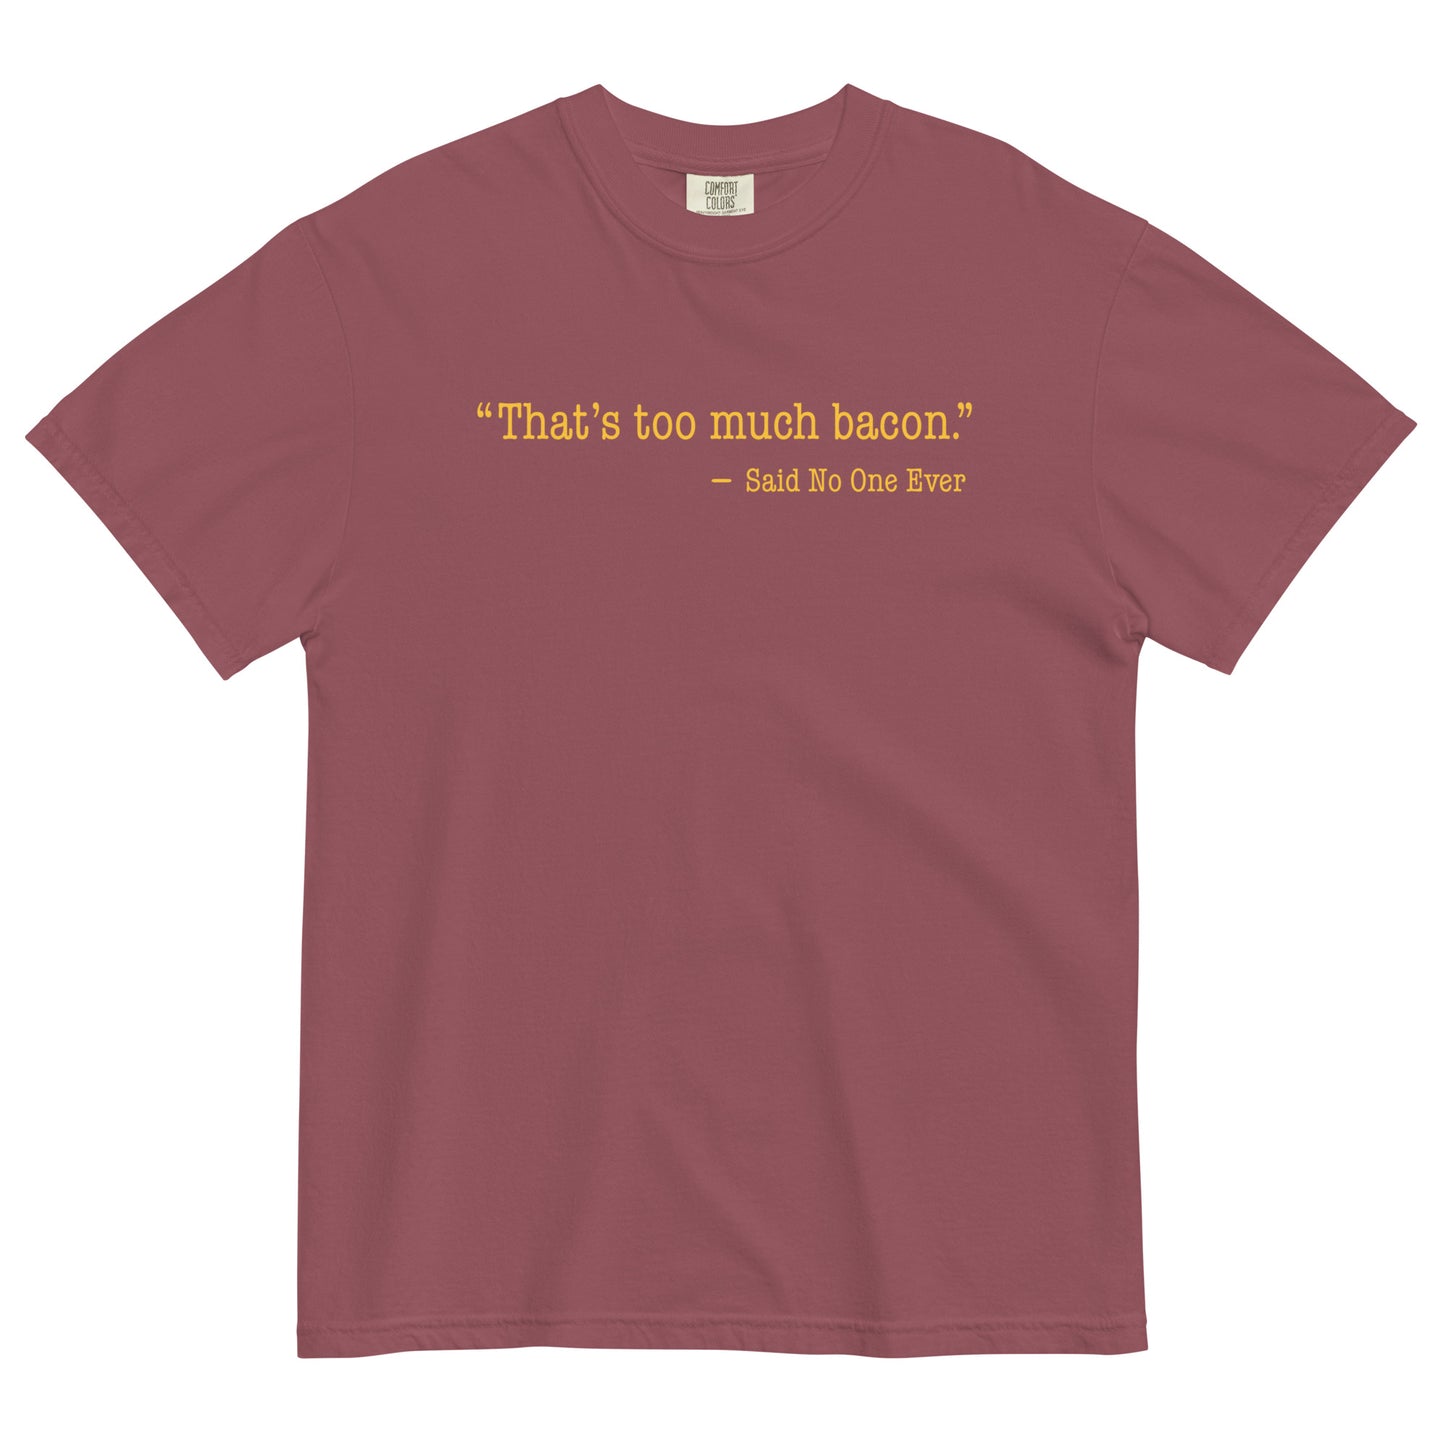 That's Too Much Bacon, Said No One Ever Men's Relaxed Fit Tee